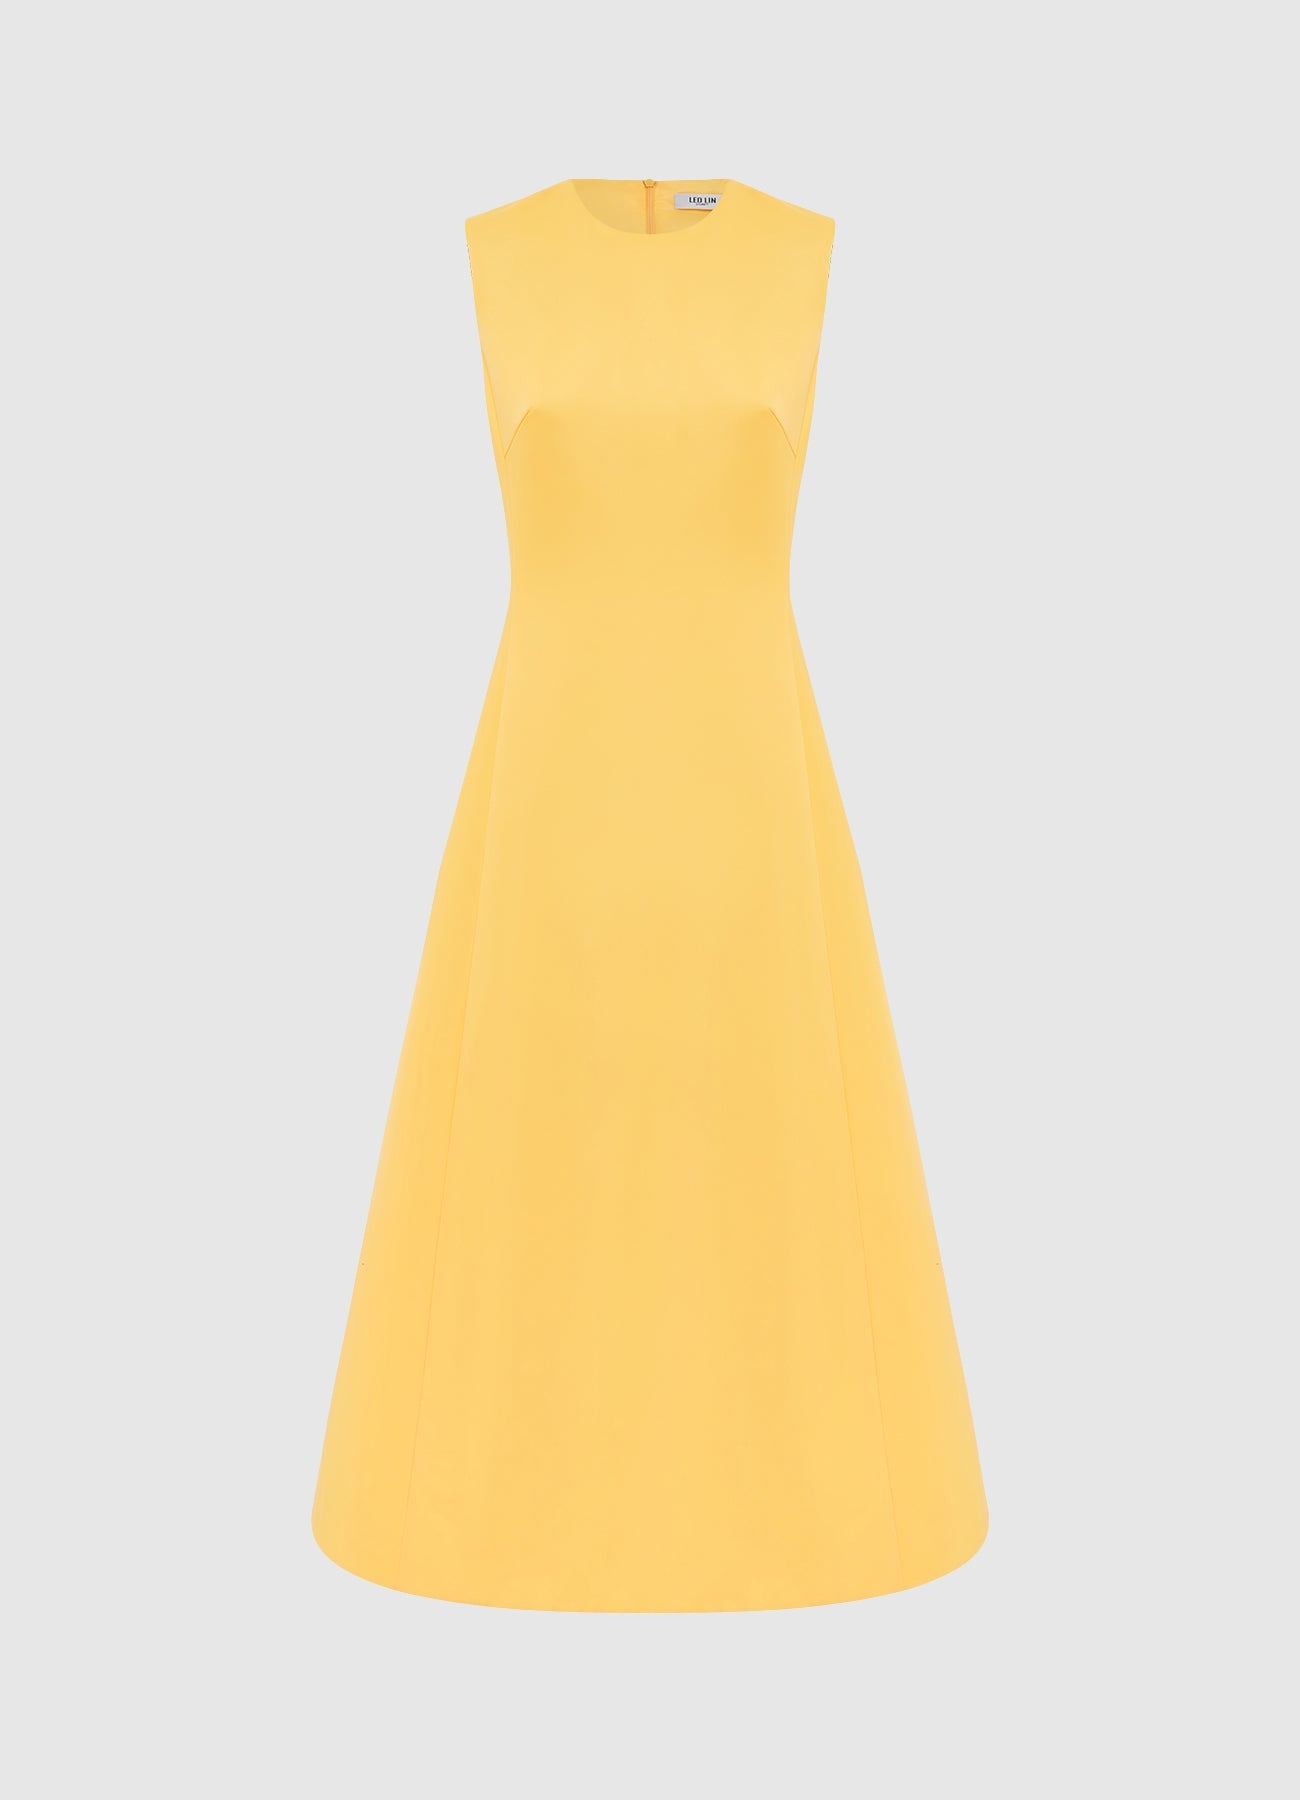 ISO Marfa Dress in Yellow Laurel Canyon Rose or Blue Laurel Canyon